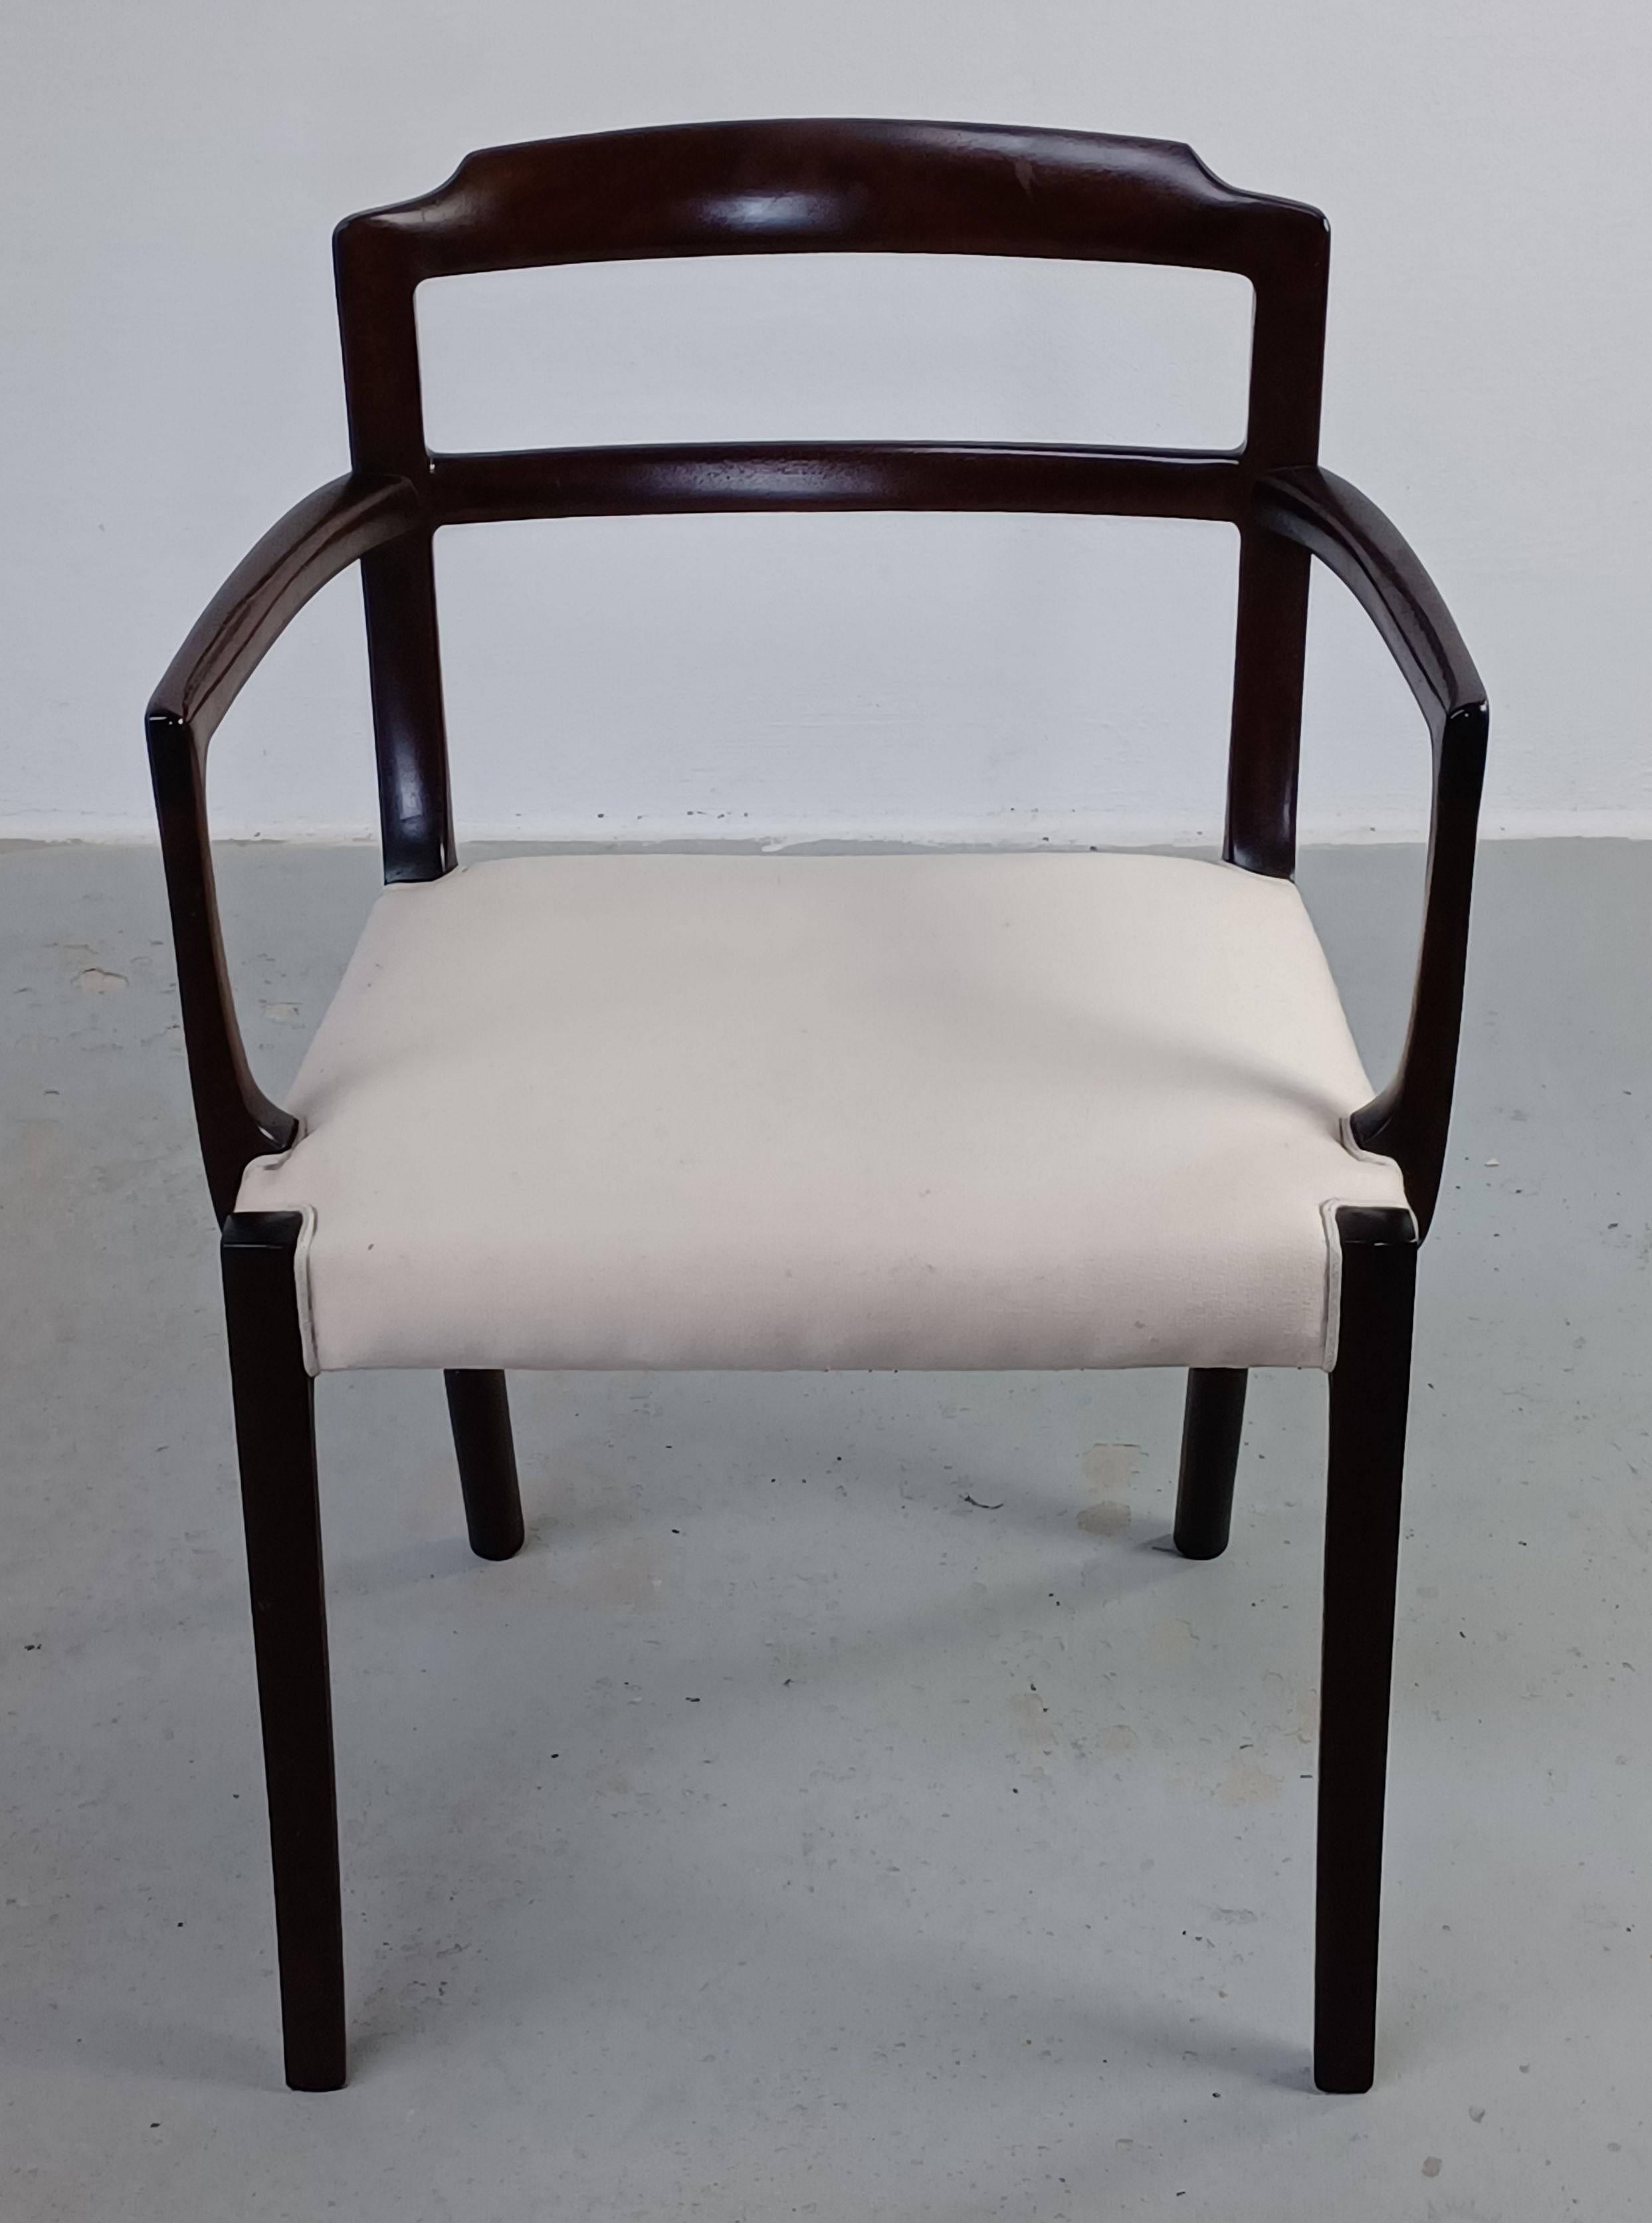 1960's Fully Restored Danish Ole Wanscher Mahogany Arm Chair Custom Upholstery

The chair feature a well well designed and well crafted elegant mid-century modern armchair with Ole Wanschers well developed sense of organic shapes and proportions and